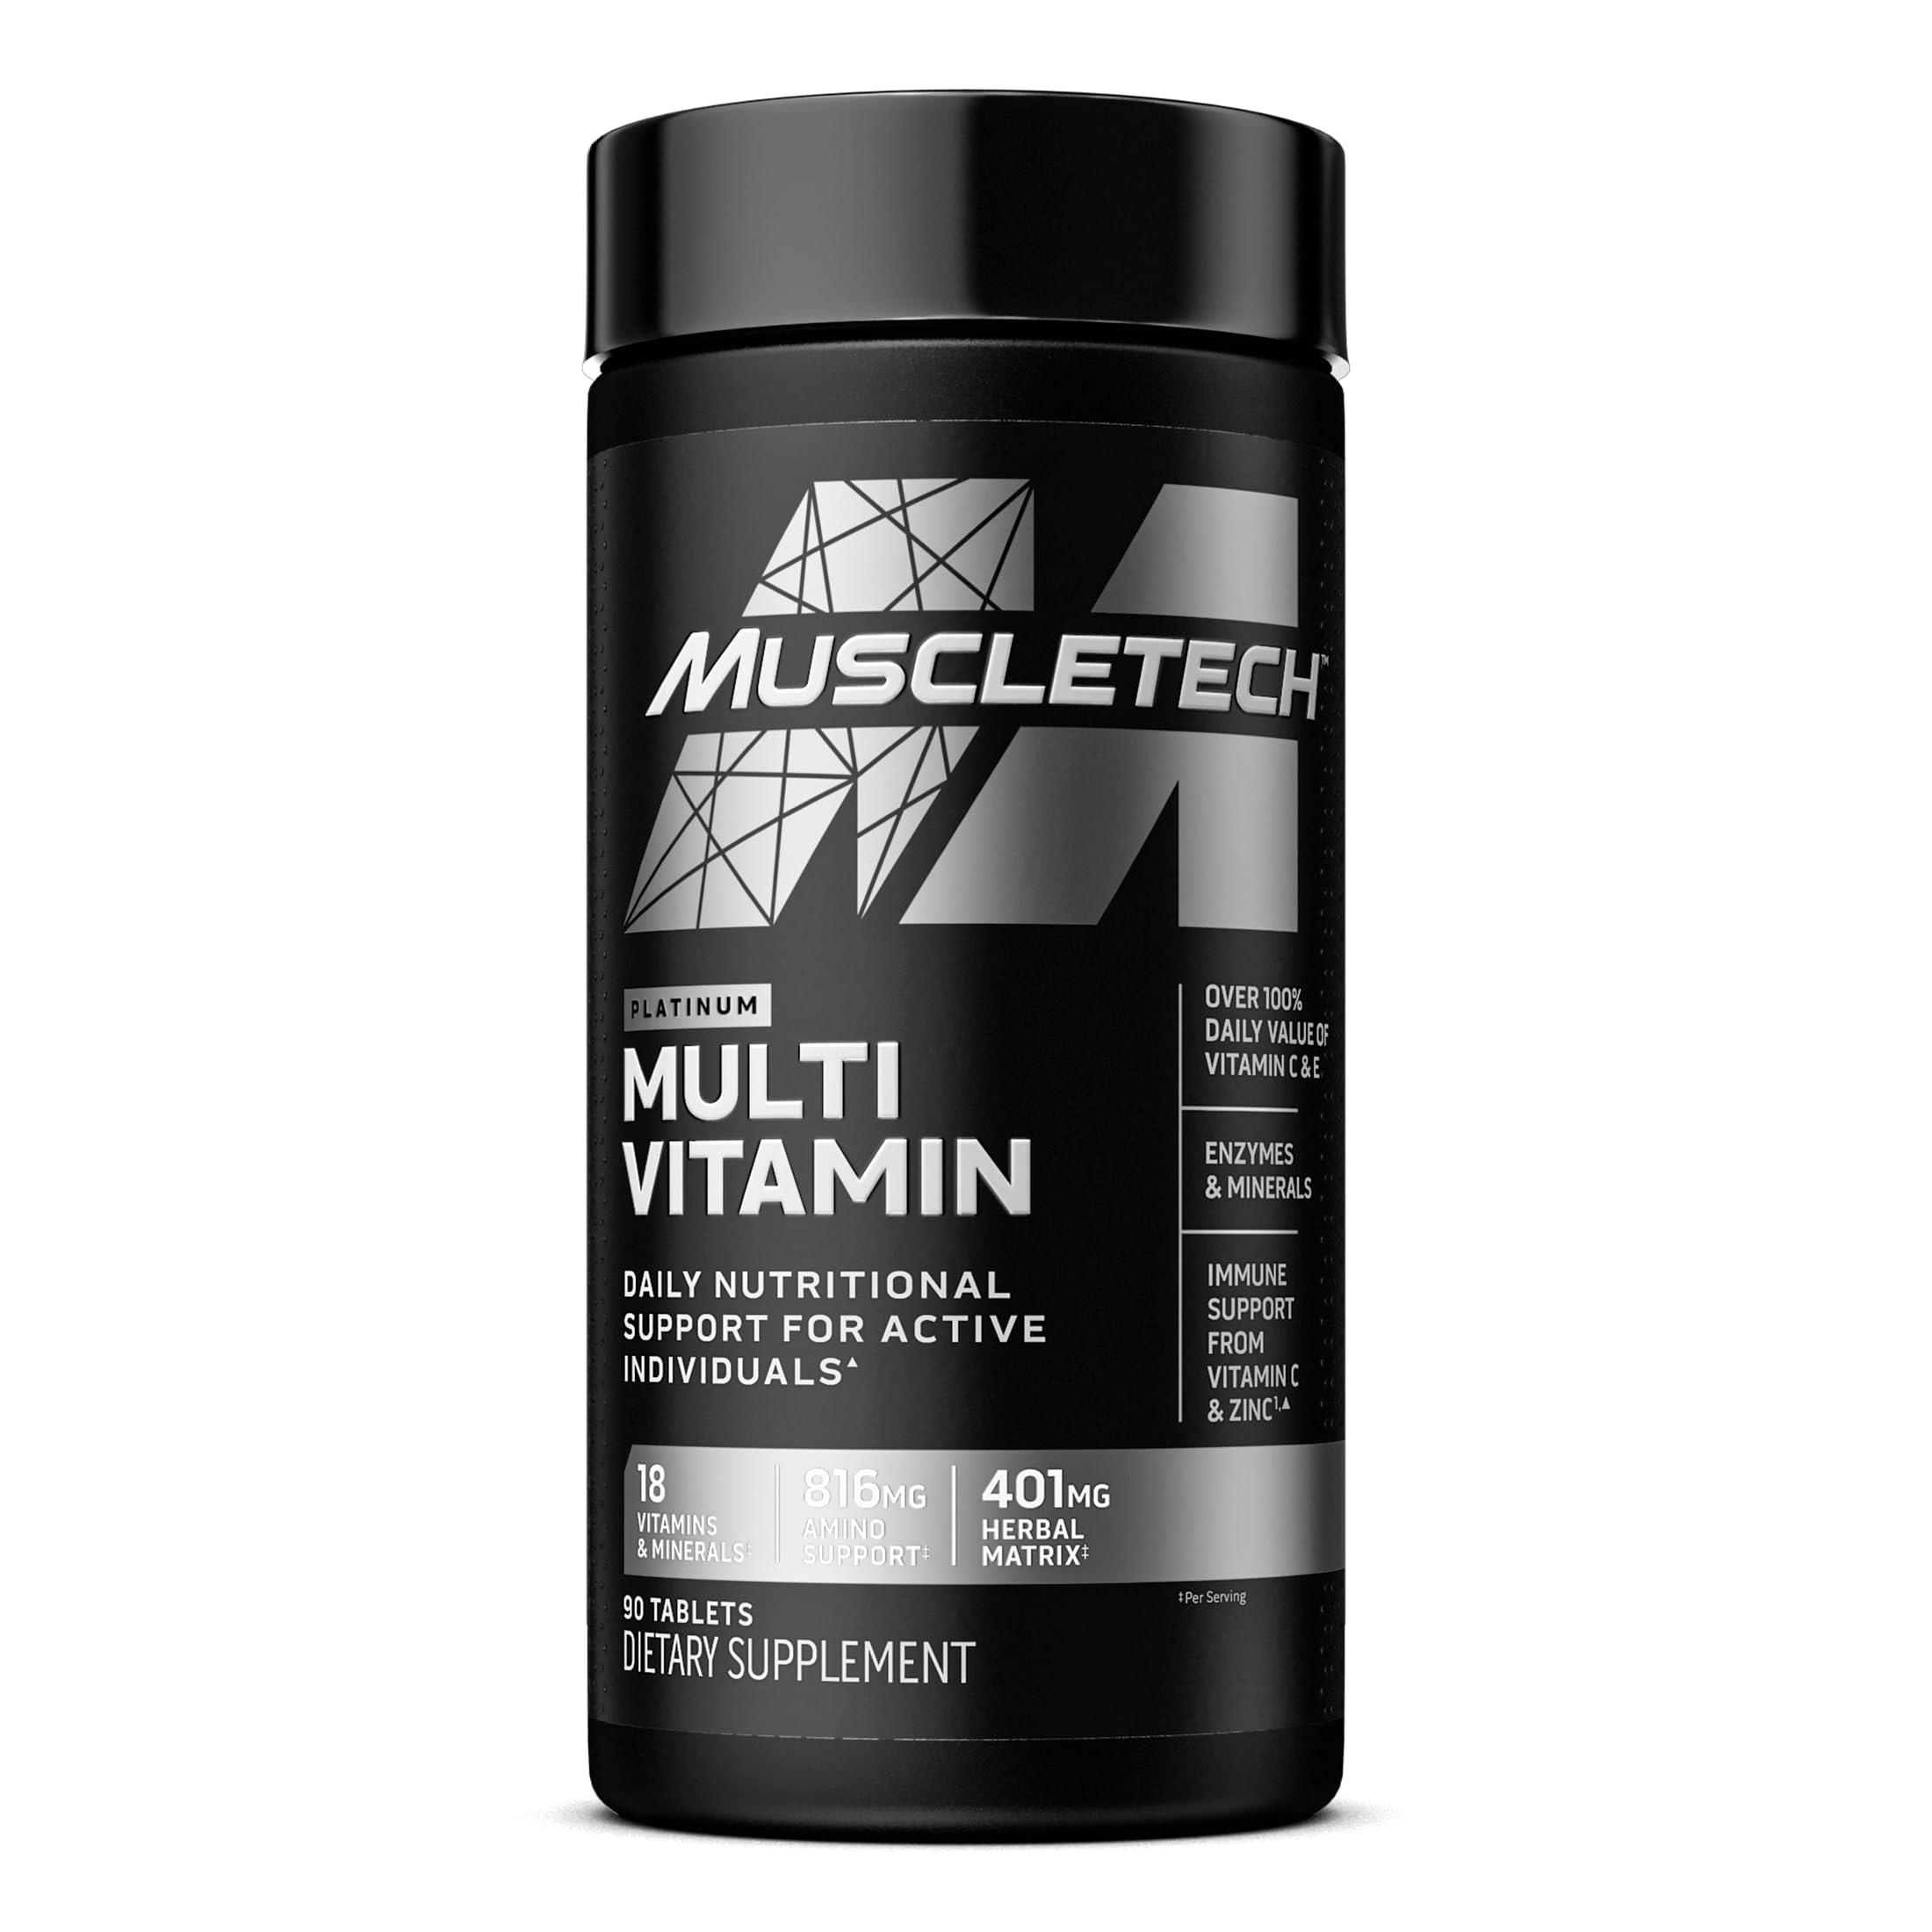 MuscleTech Clear Muscle Post Workout Recovery | Muscle Builder for Men & Women & Platinum Multivitamin for Immune Support 18 Vitamins